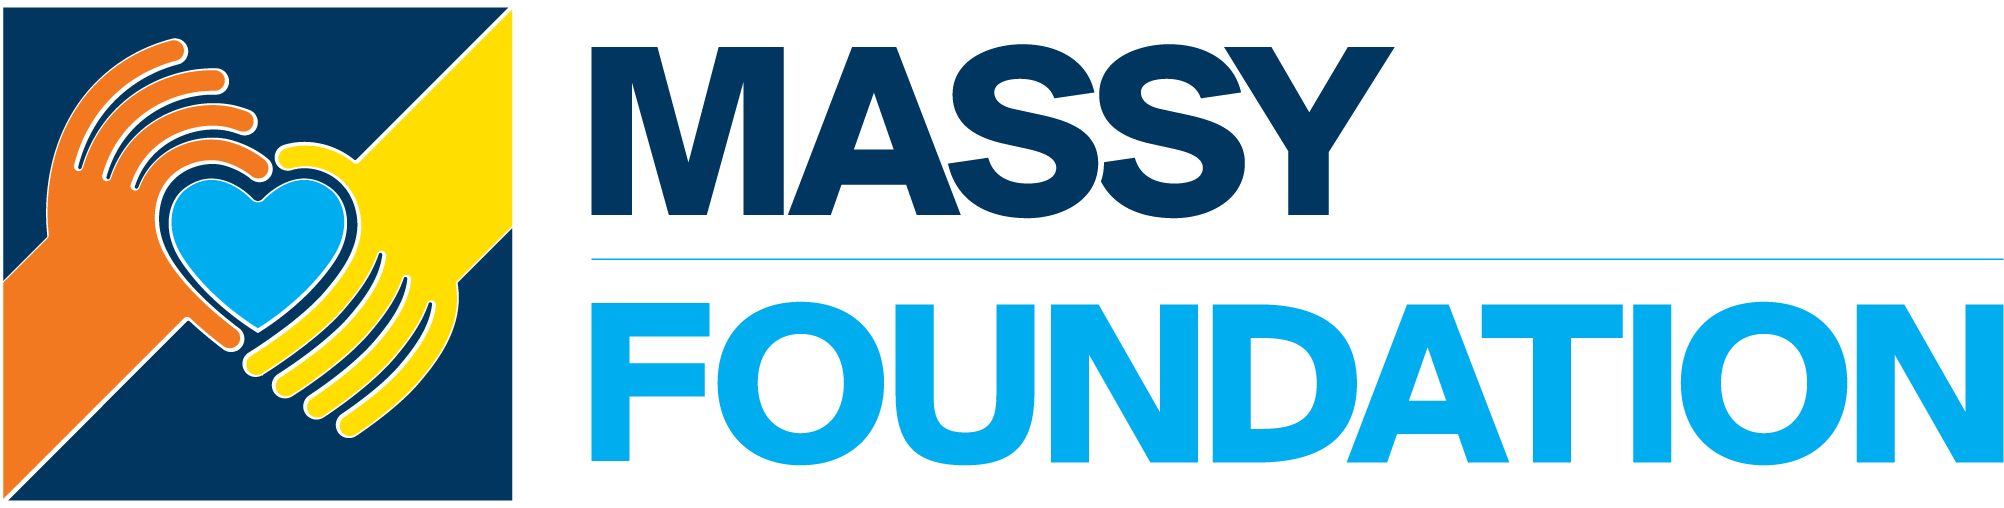 Neal & Massy Foundation.png